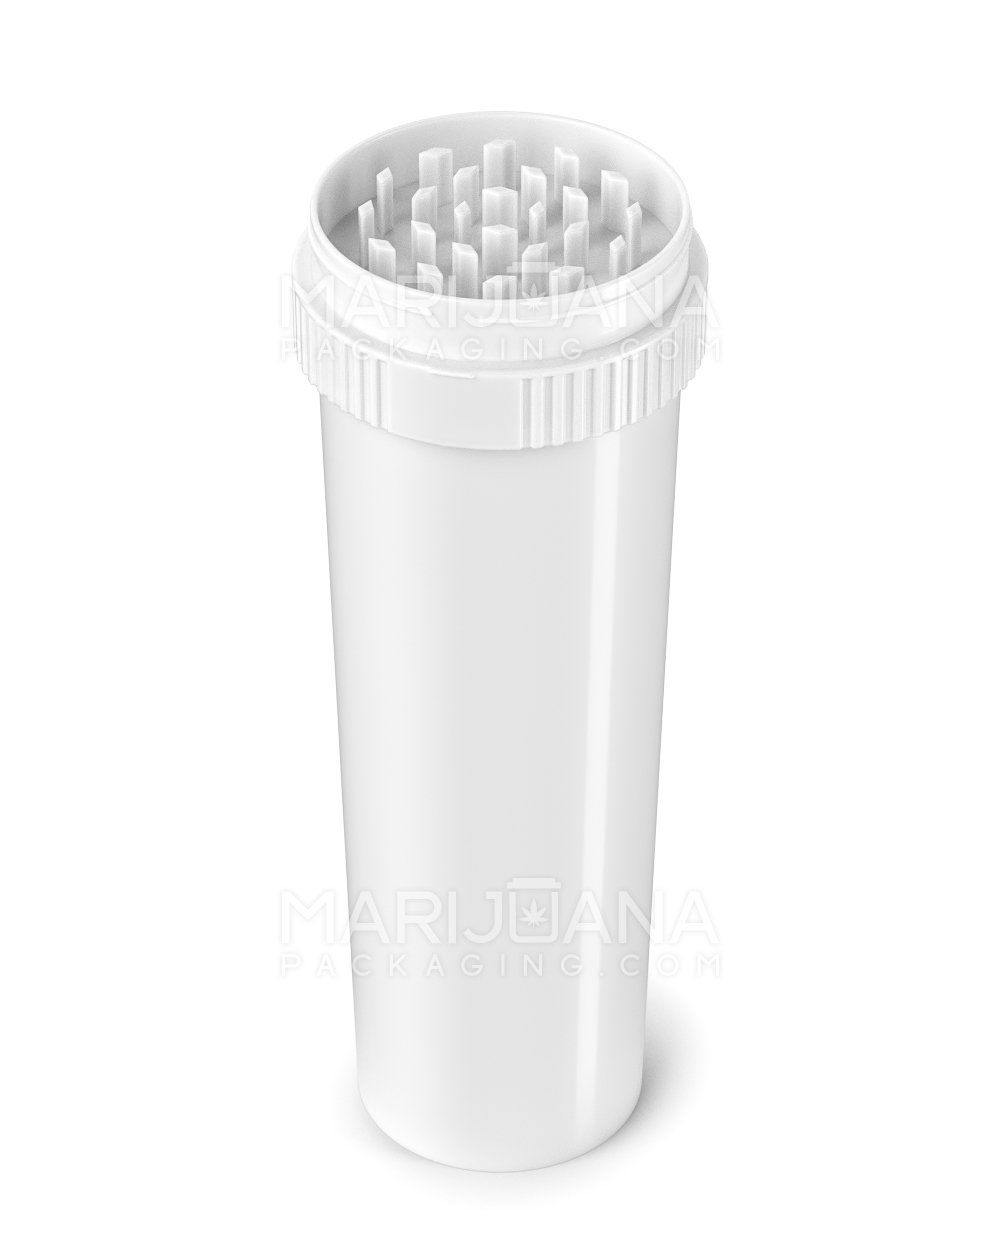 Child Resistant | Push & Turn Vial with Grinder Cap | 60dr - White Plastic - 100 Count - 2